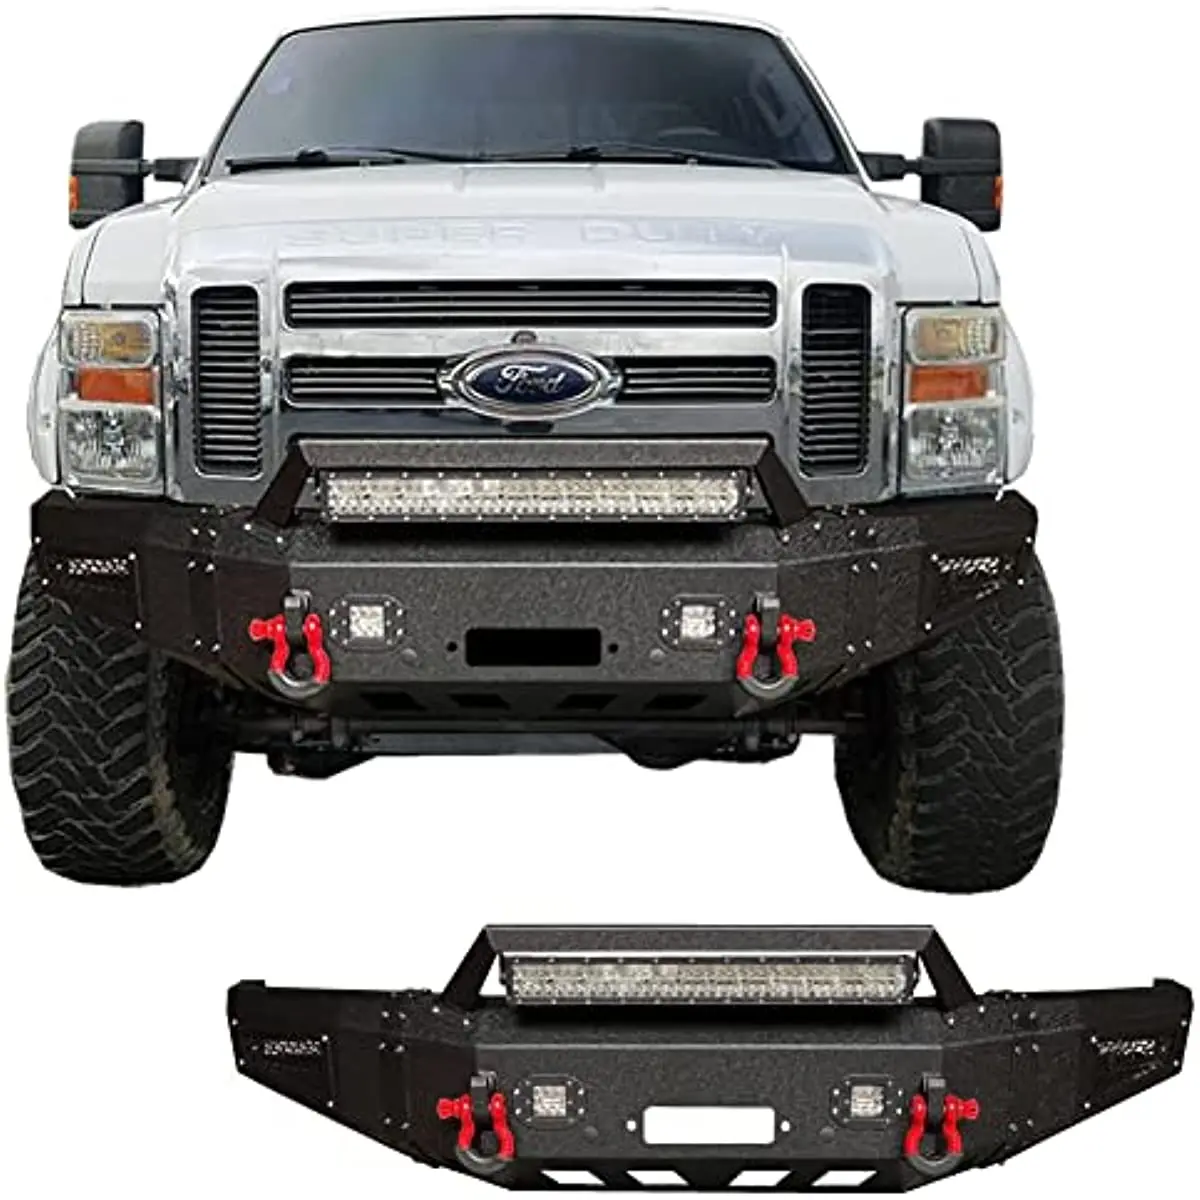 

Vijay Front Bumper Compatible with 2008-2010 Ford F250 F350 Super Duty with Winch Plate and LED Lights